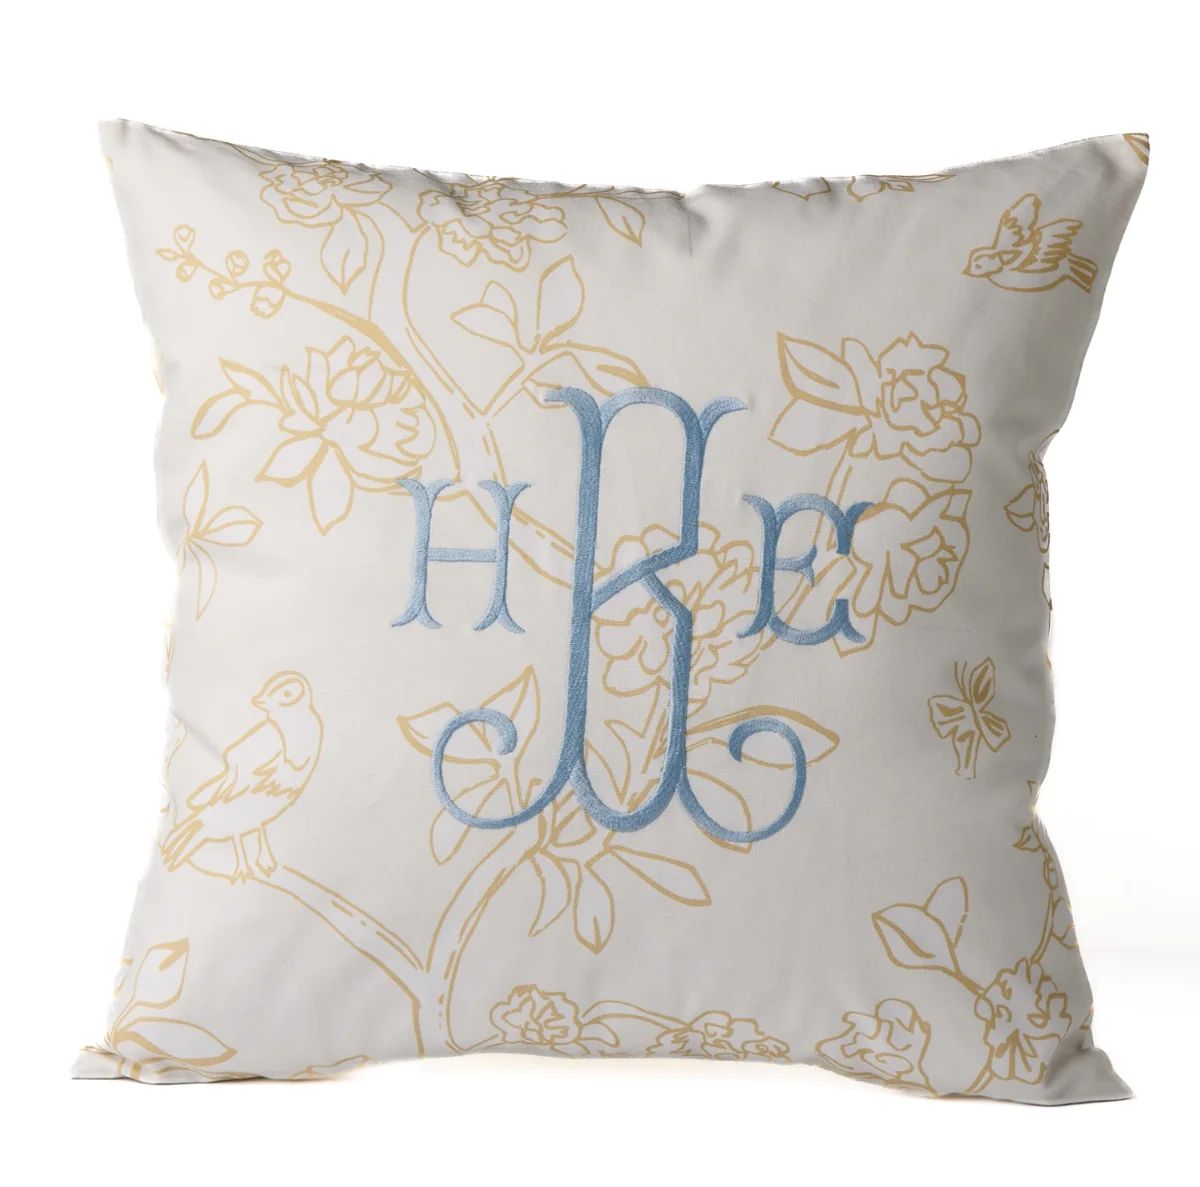 Chinoiserie Print Pillow | Over The Moon Gift